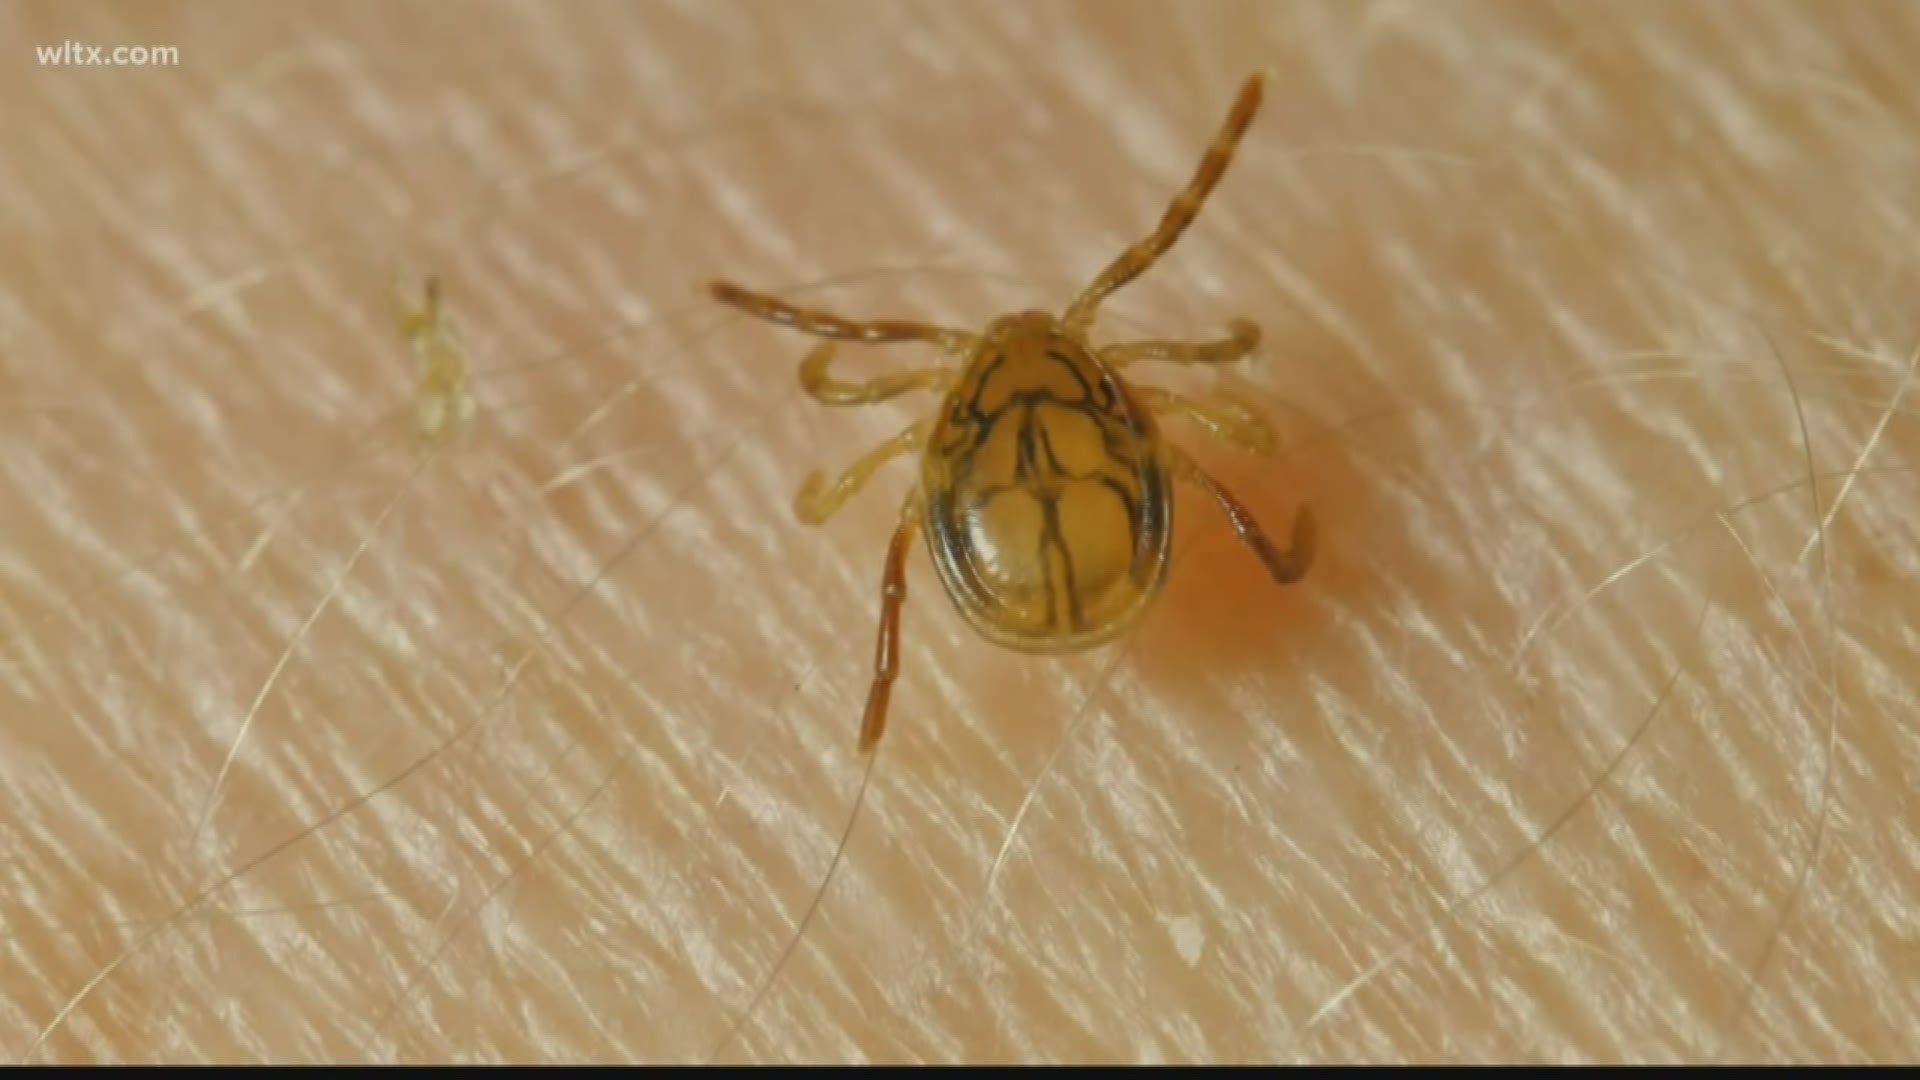 Doctors say ticks could cause you some health hazard if you're not careful.